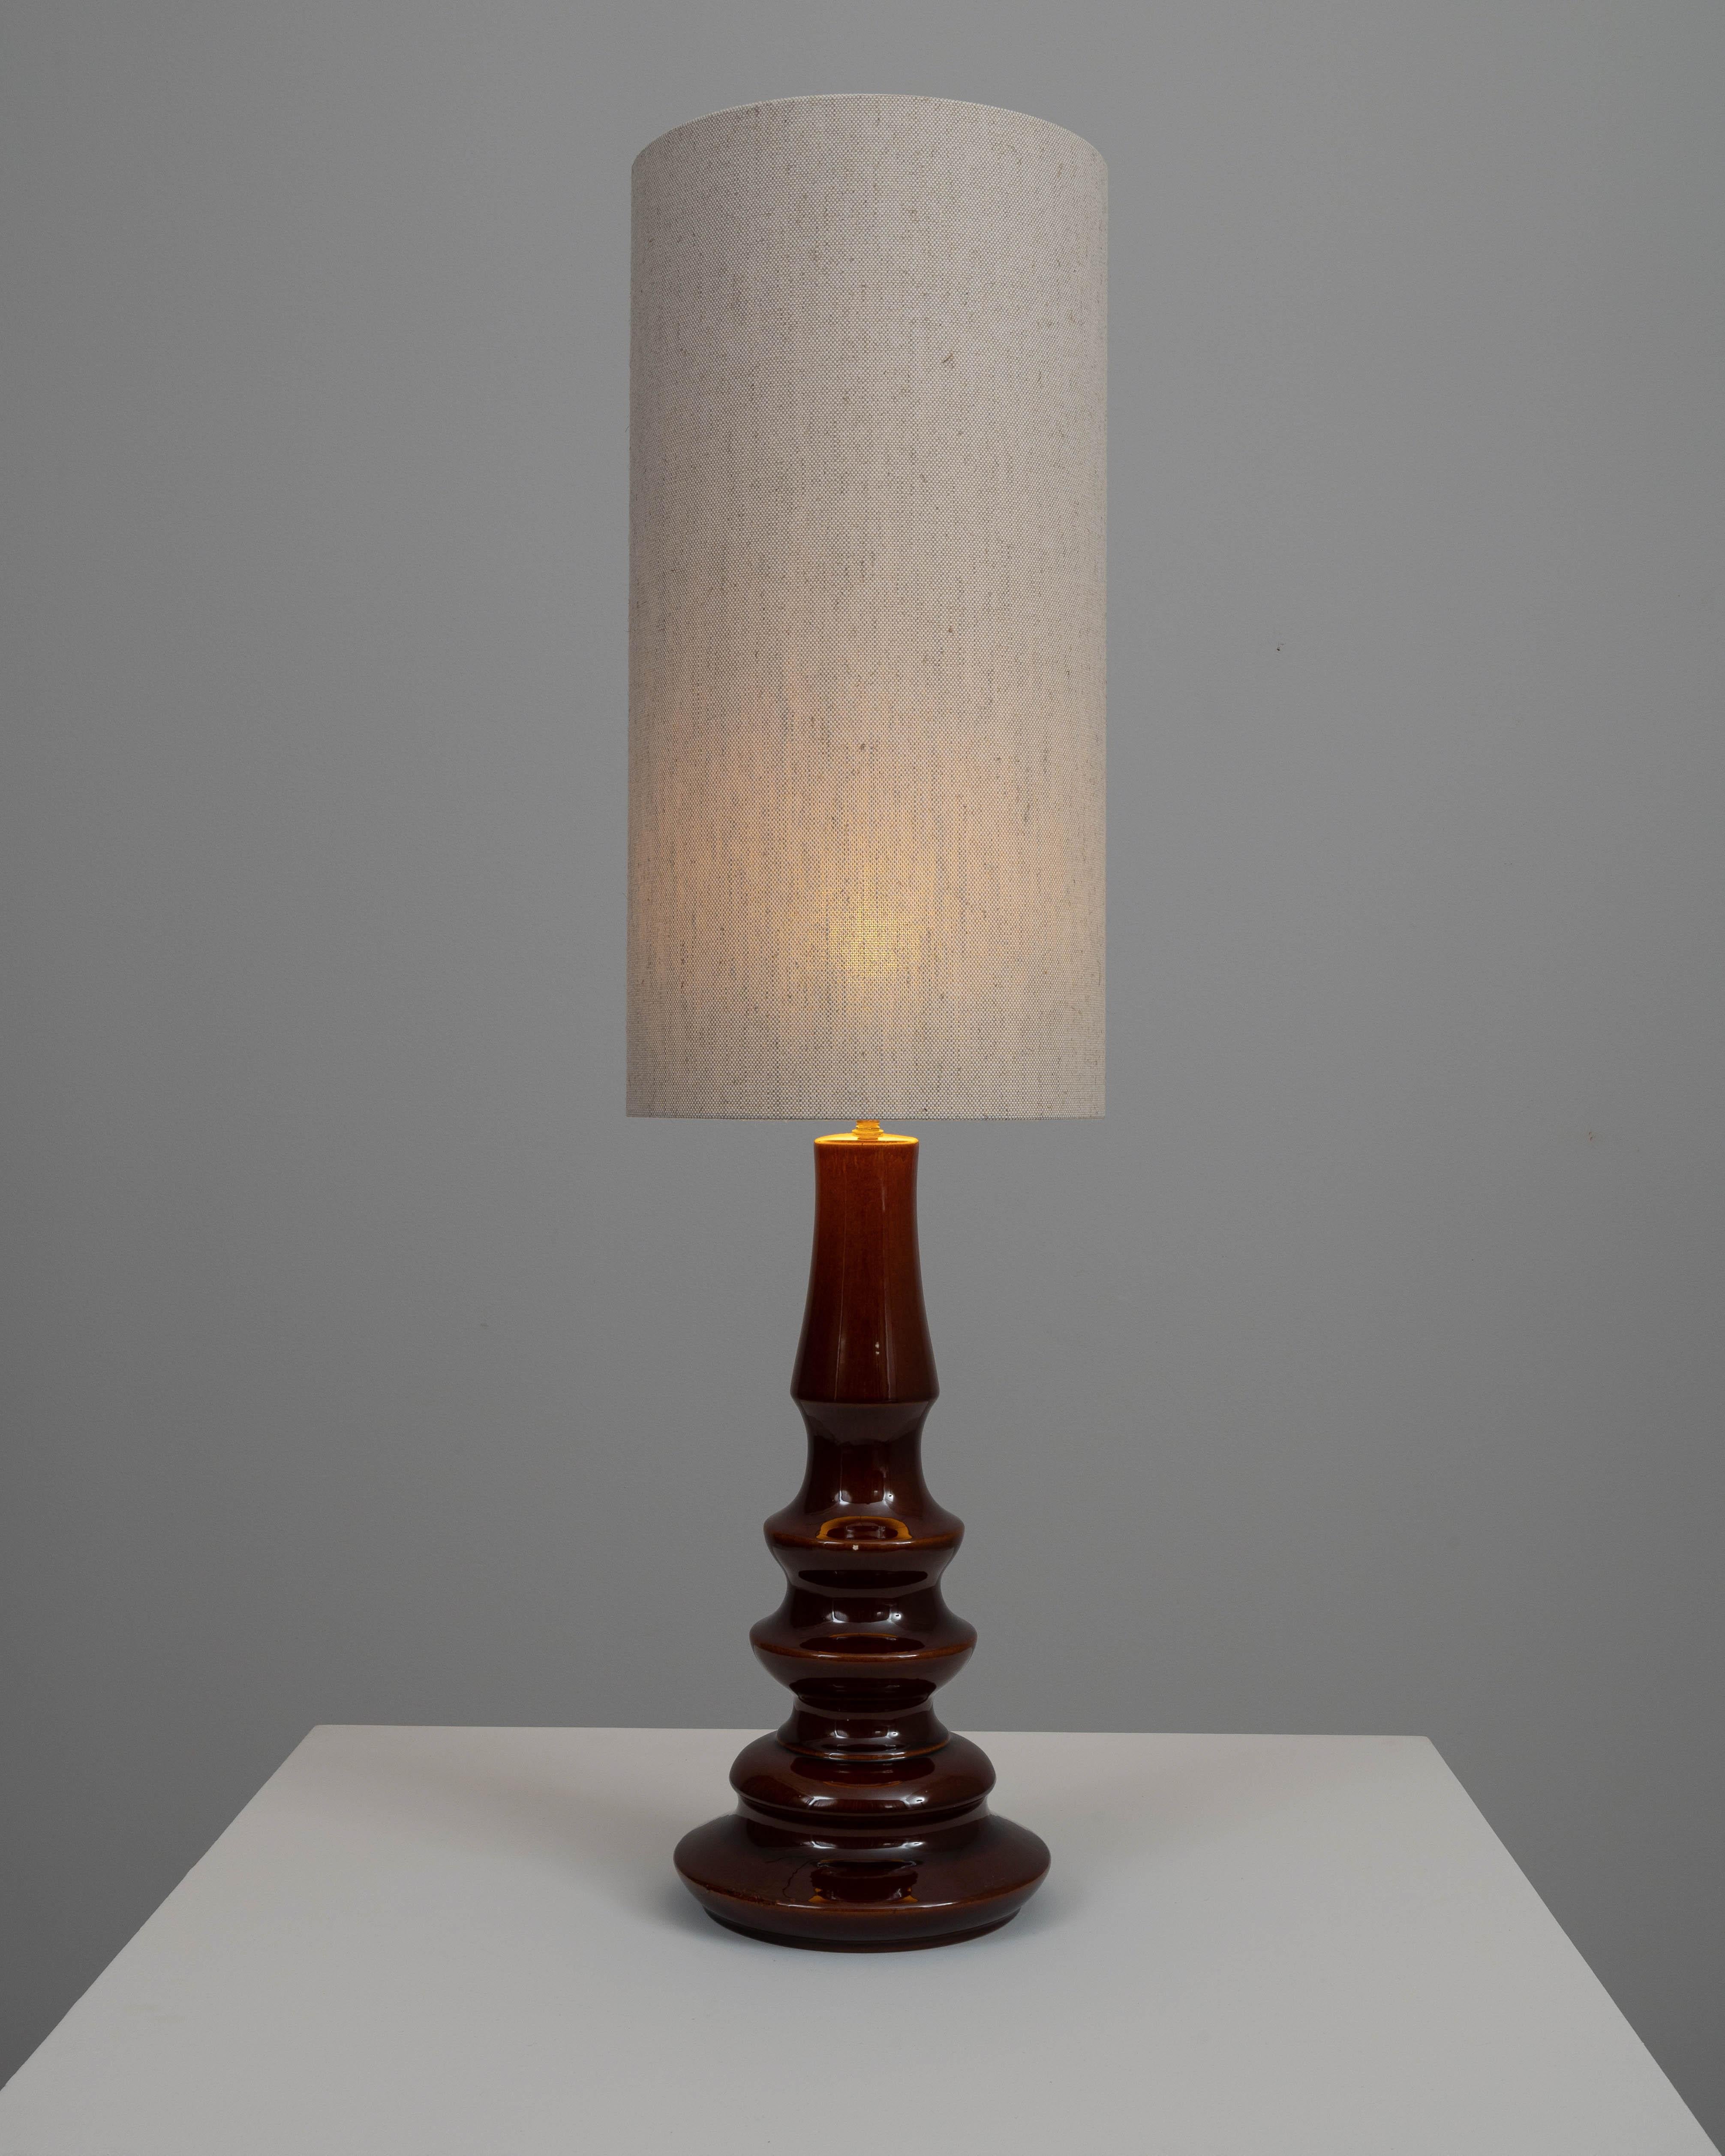 Elevate your interior decor with this early 20th-century British ceramic table lamp. This exquisite piece features a richly glazed brown base with a unique, sculptural silhouette that adds a touch of sophistication to any room. The lamp is topped